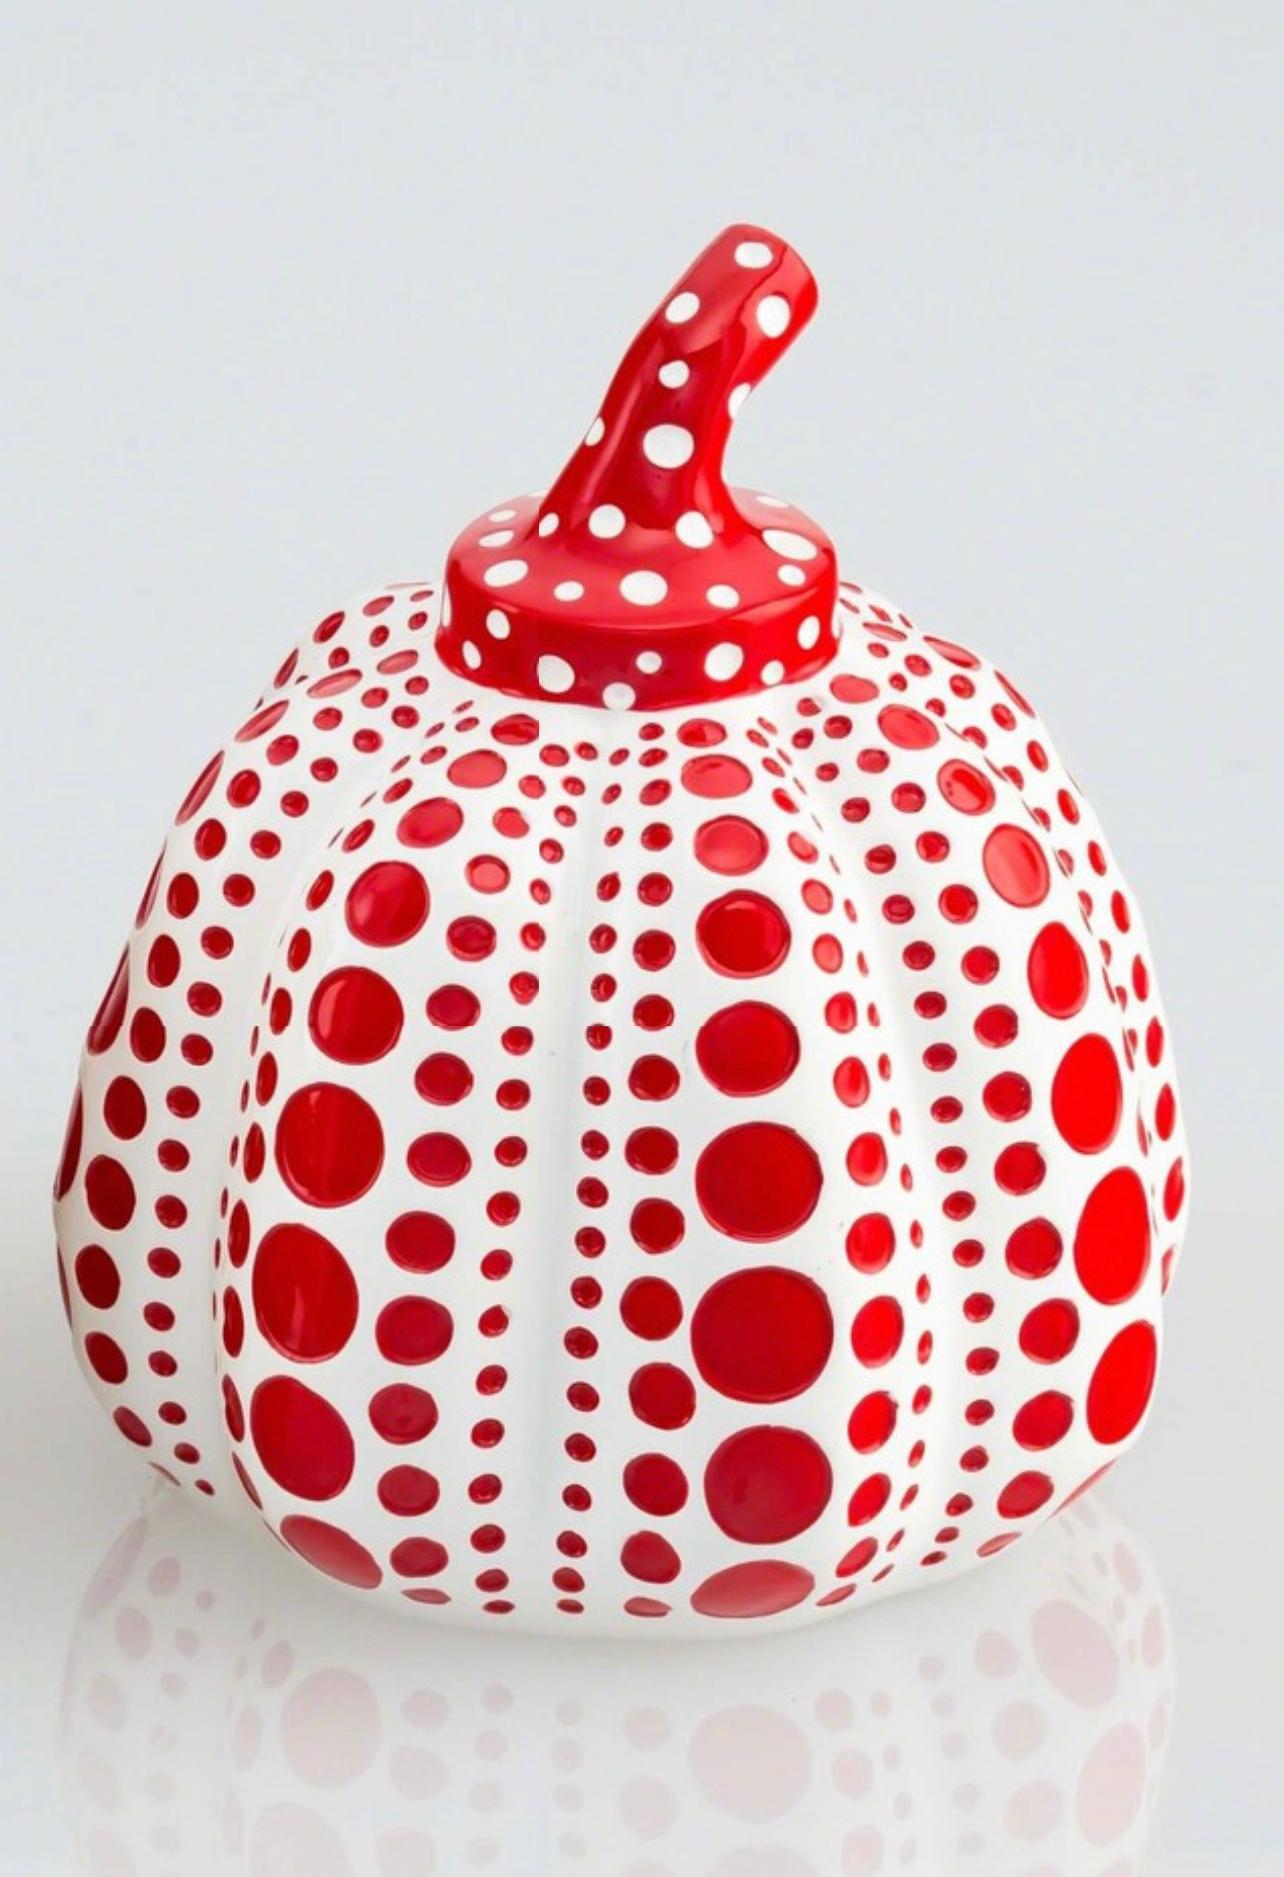 YAYOI KUSAMA (1929 - ) Artist and writer known for exploring a variety of media, including painting, sculpture, collage, performance art and environmental installations. She is considered to be one of the most important living artists to come out of